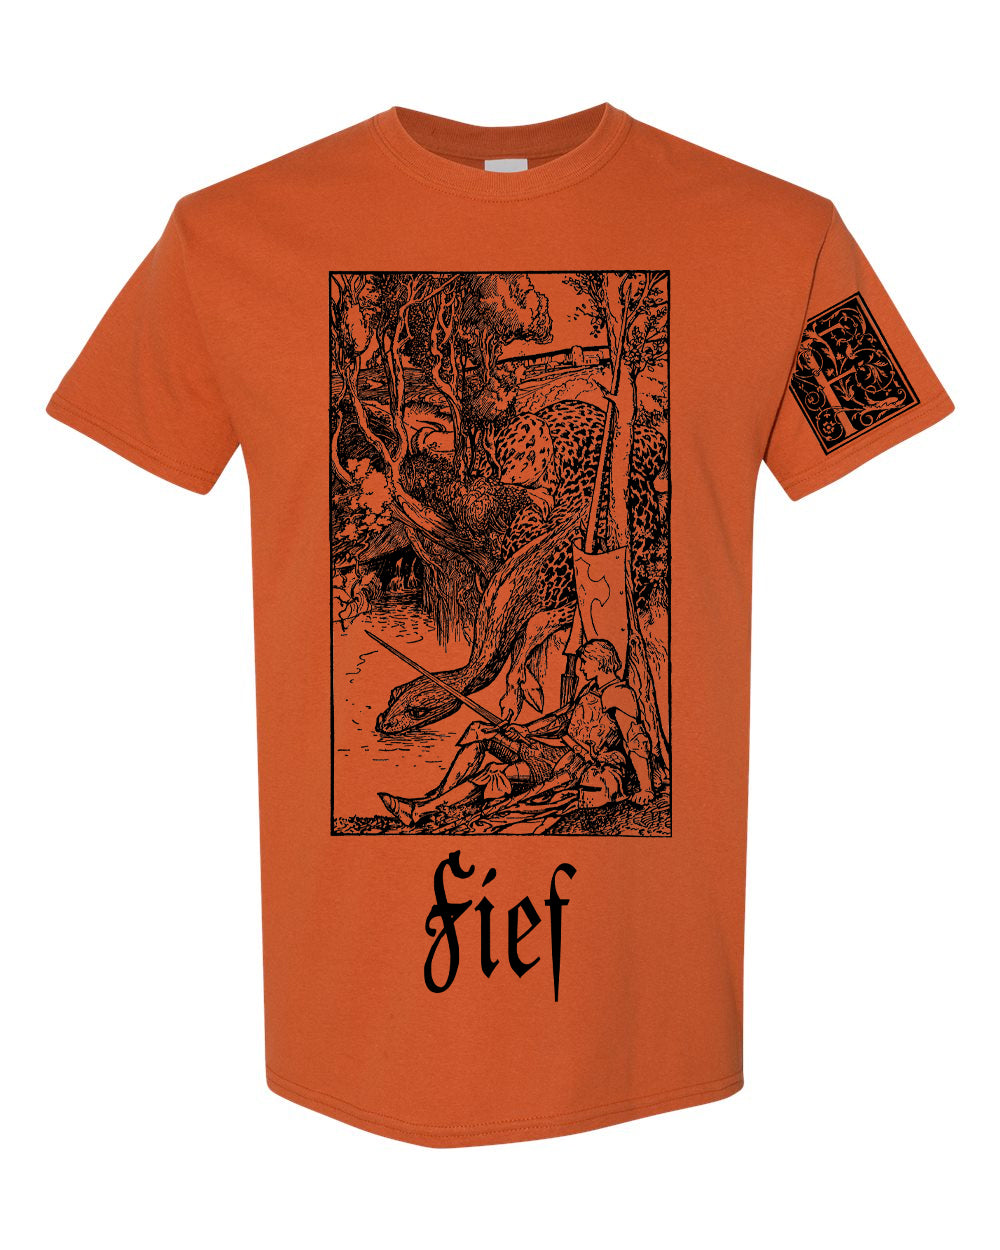 *RESTOCKED* FIEF "To Rest in the Shade of Dragon Wings" T-Shirt [BURNT ORANGE]